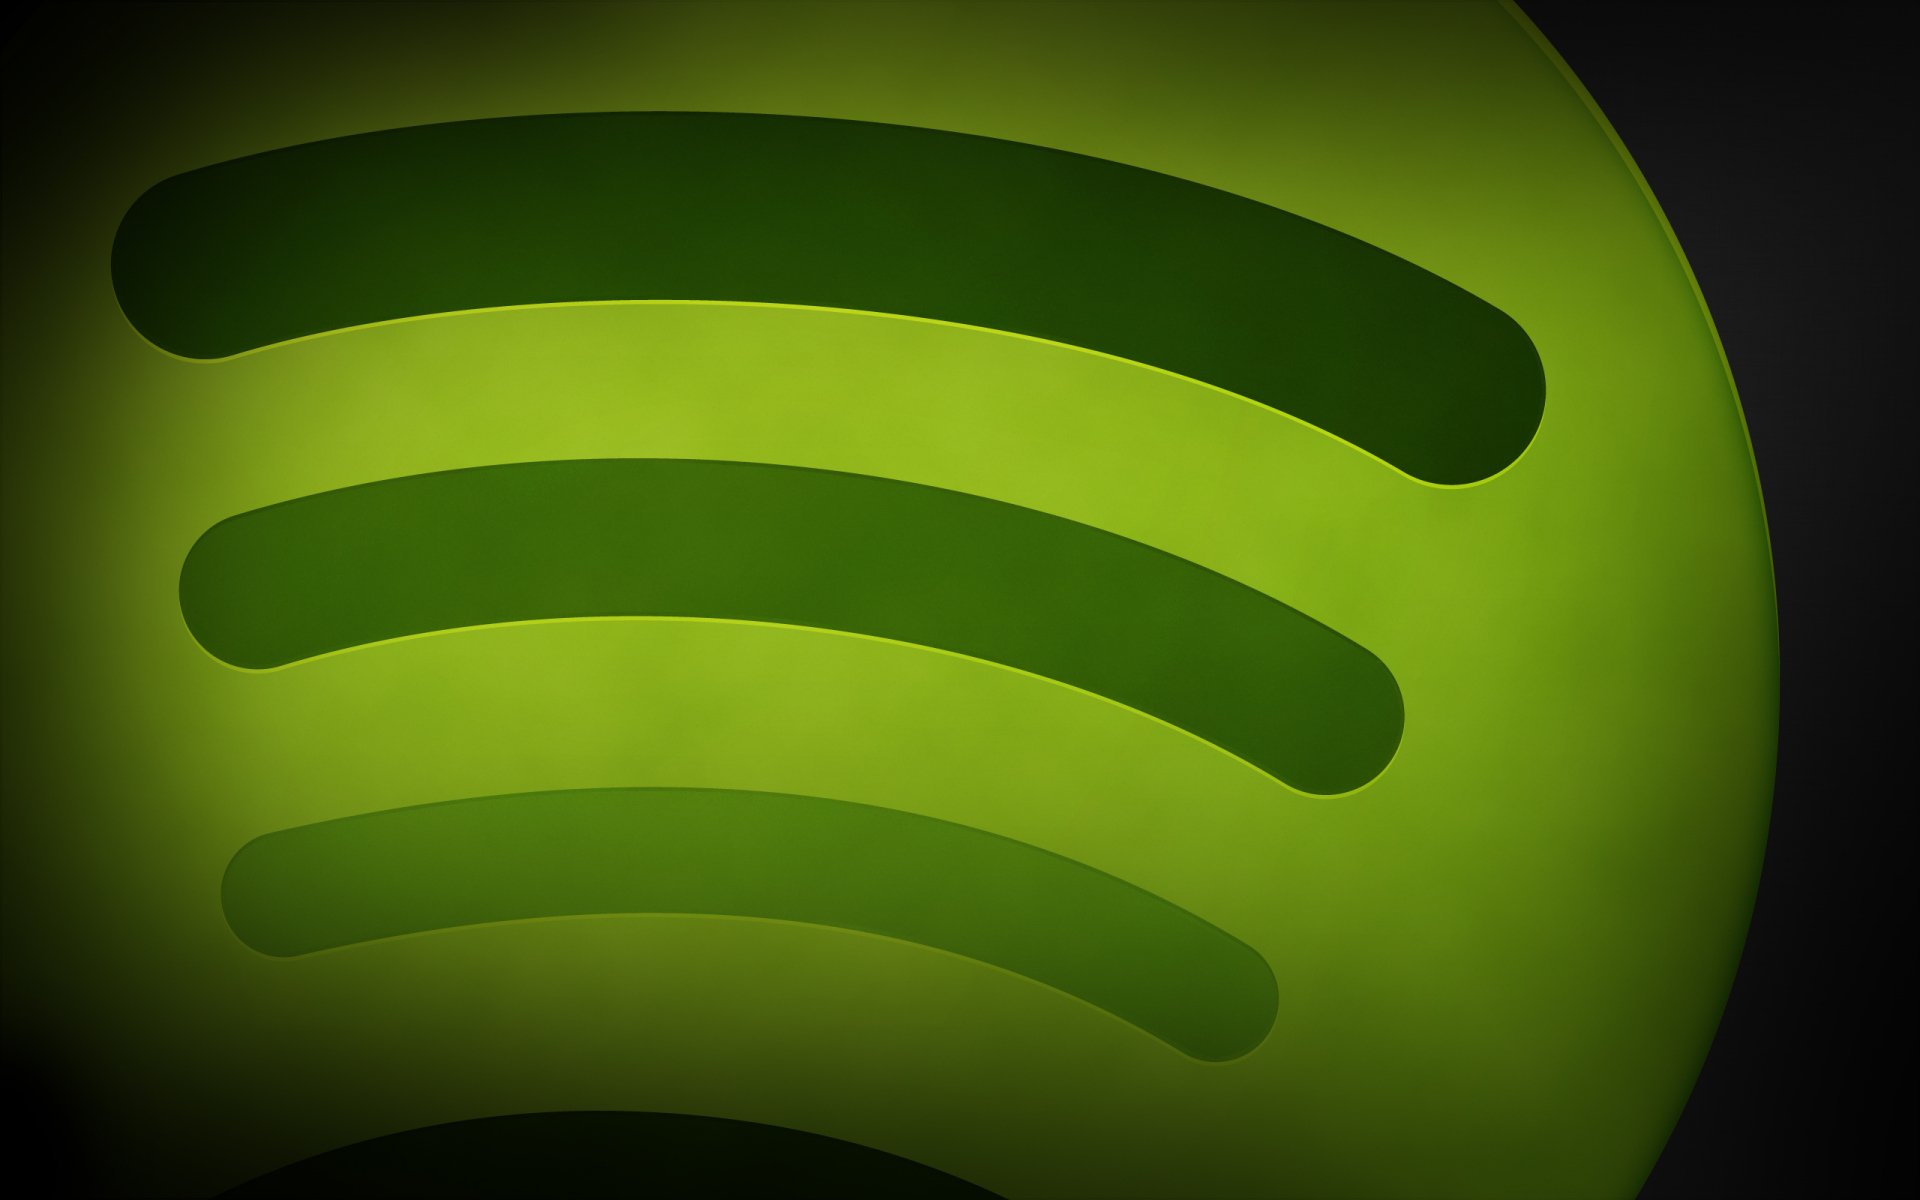 spotify background clipart